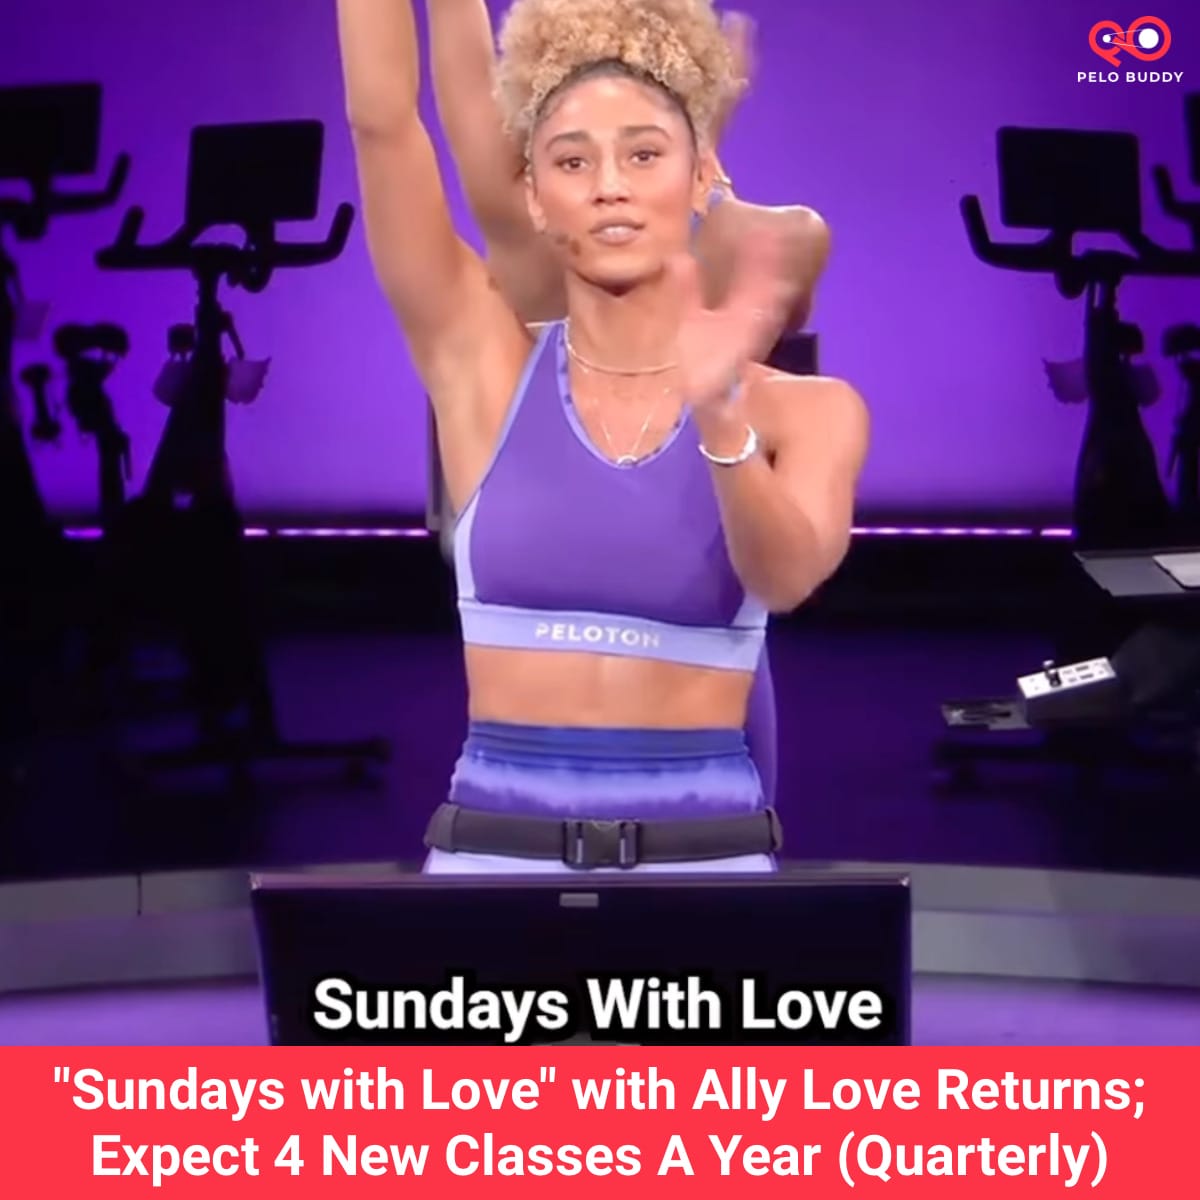 Sundays with Love with Ally Love Returns; Expect 4 New Classes A Year  (Quarterly) - Peloton Buddy